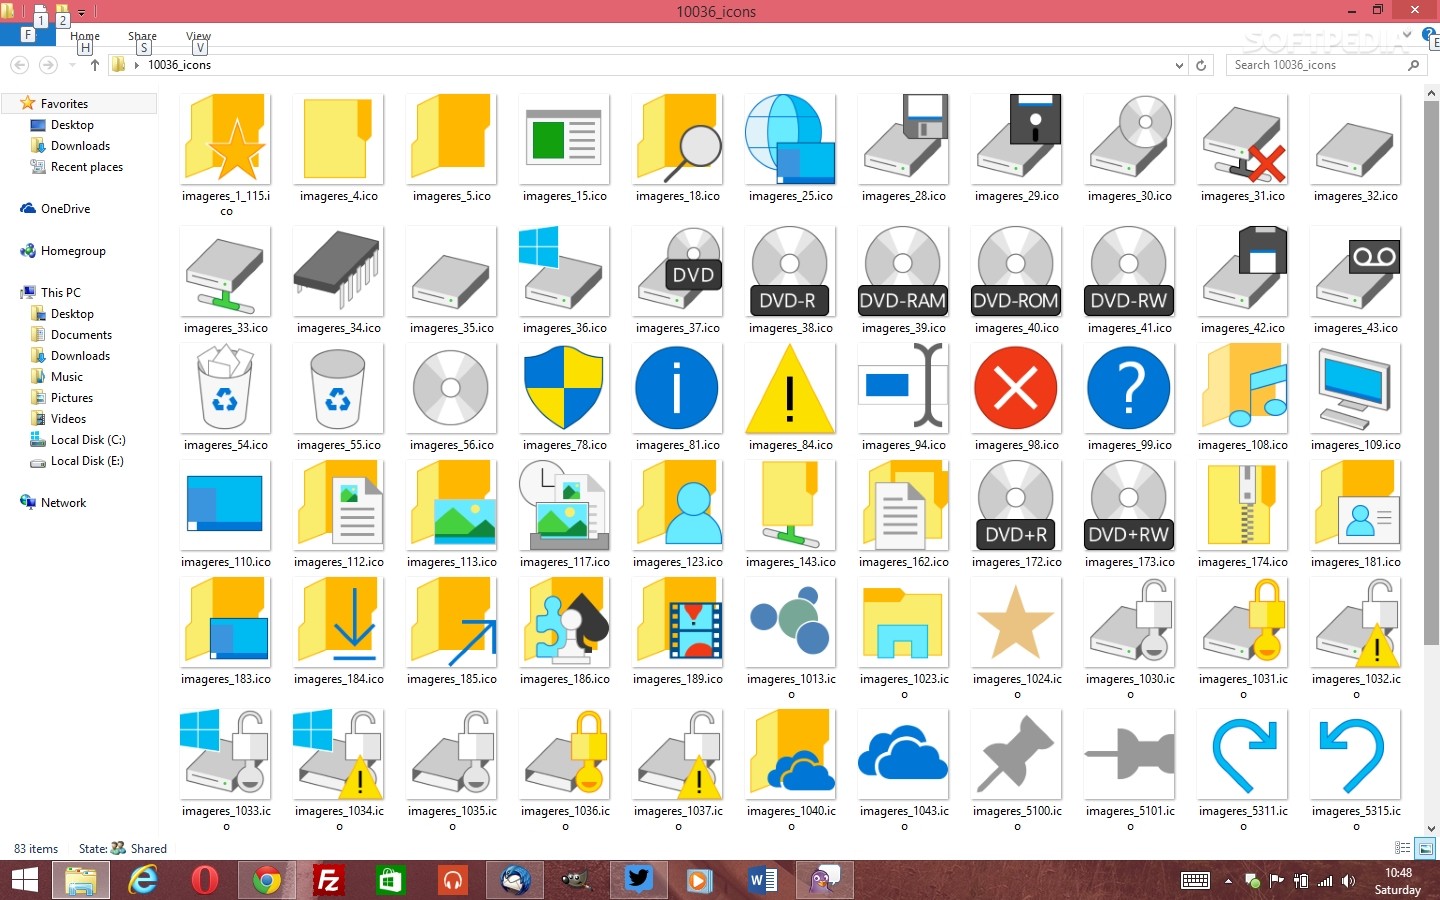 Download The New Updated Icons From Windows 10 Build 10036 